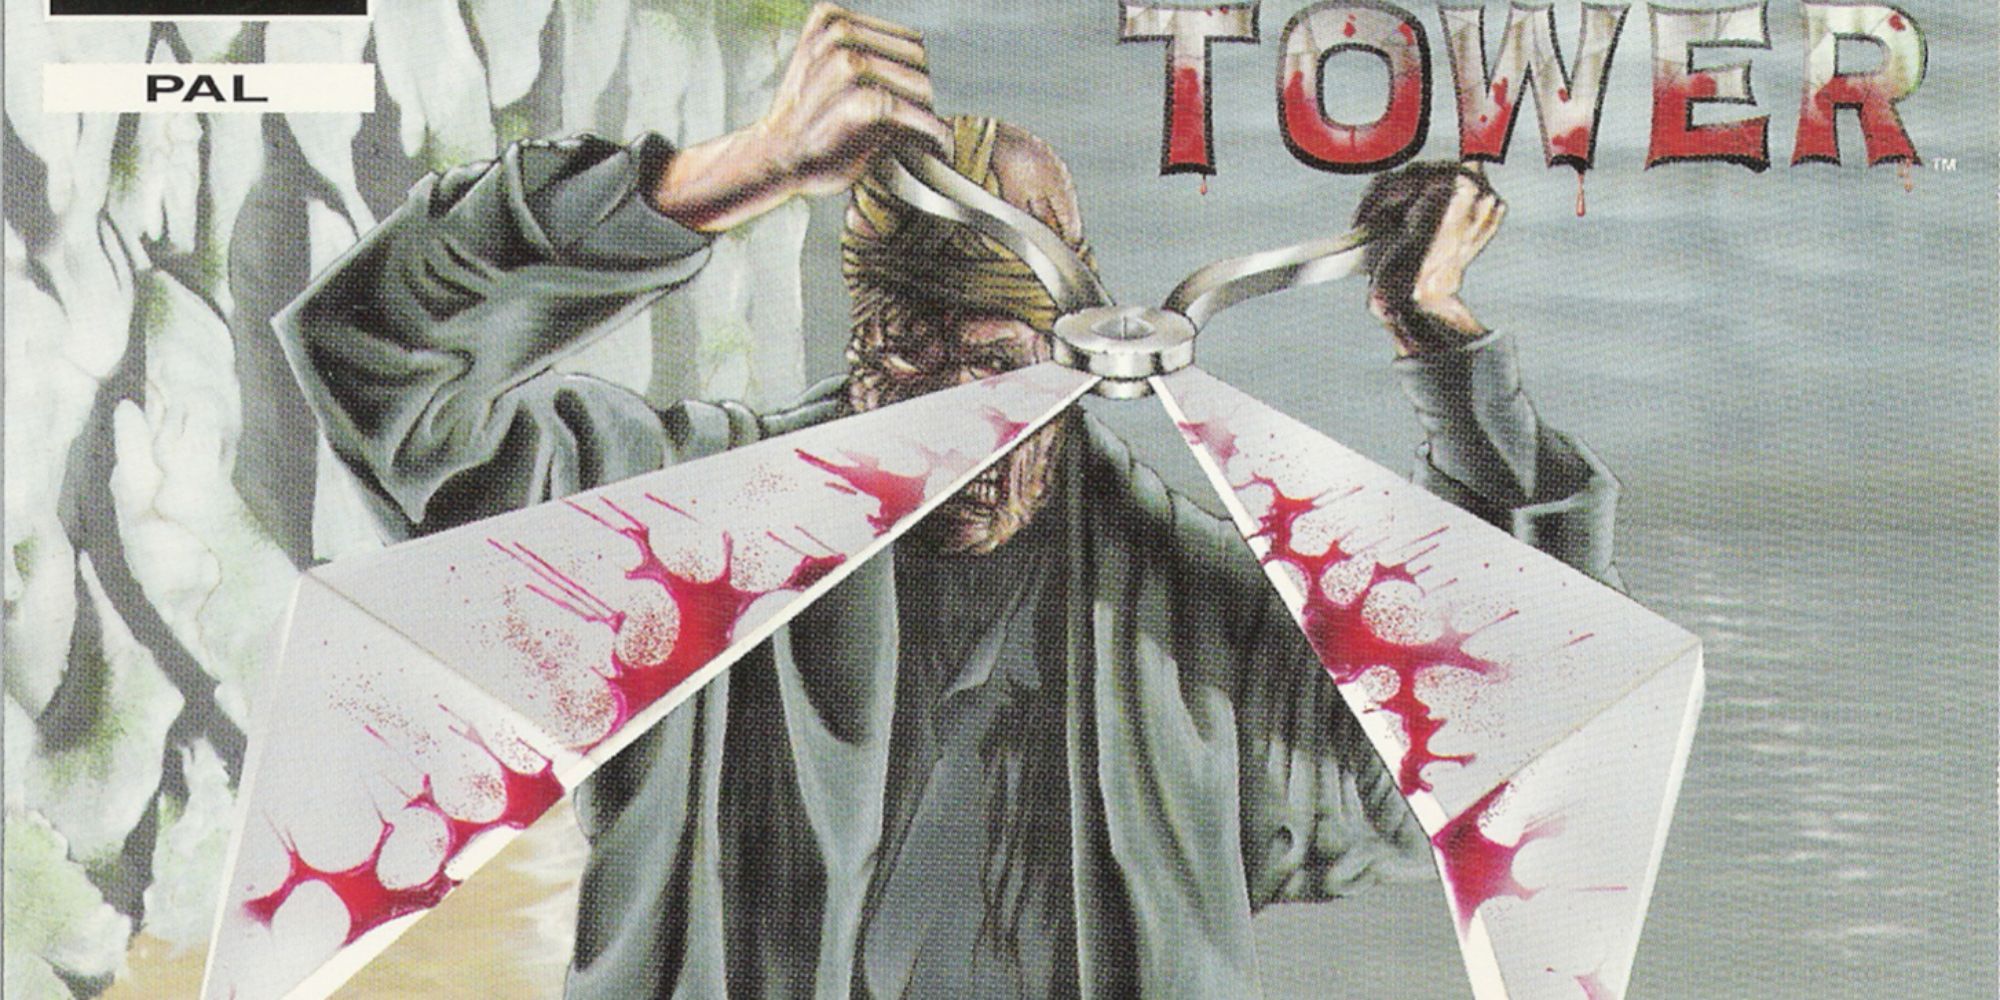 The cover of Clock Tower featuring a man with bloody shears